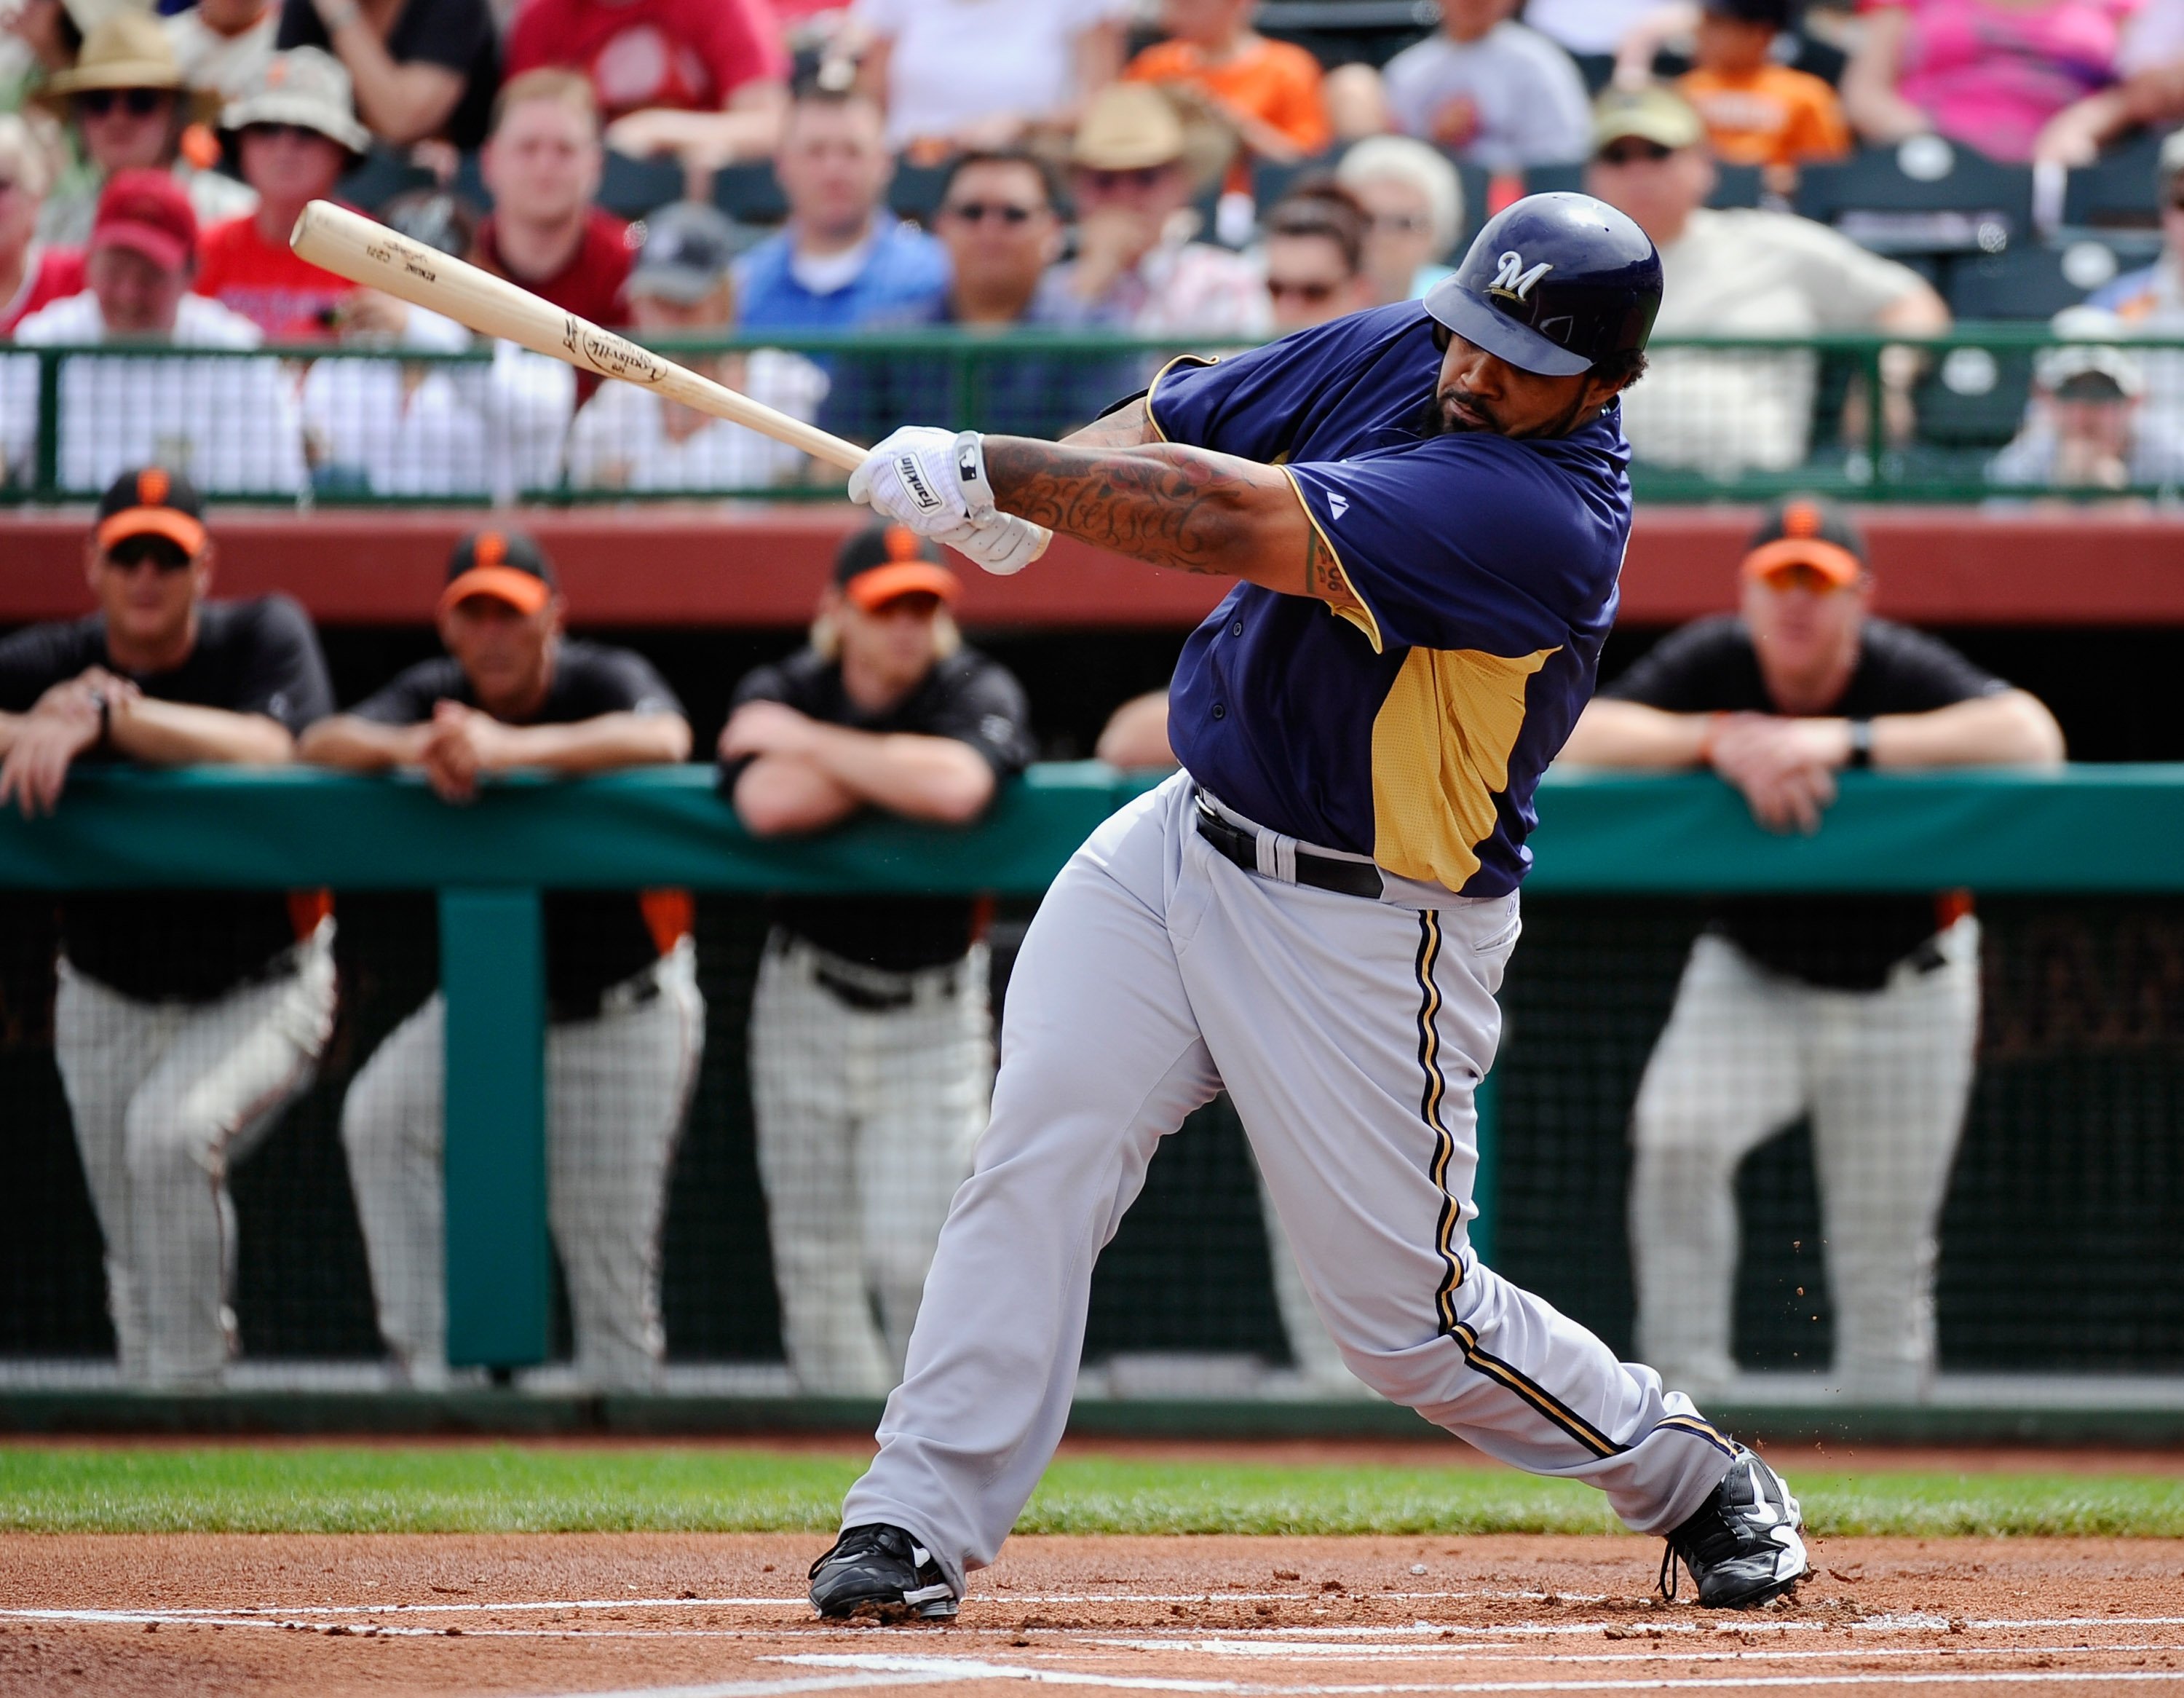 SCOTTSDALE, AZ - MARCH 14:  Prince Fielder#28 of the Milwaukee Brewers swings the bat against the San Francisco Giants during the spring training baseball game at Scottsdale Stadium on March 14, 2011 in Scottsdale, Arizona.  (Photo by Kevork Djansezian/Ge